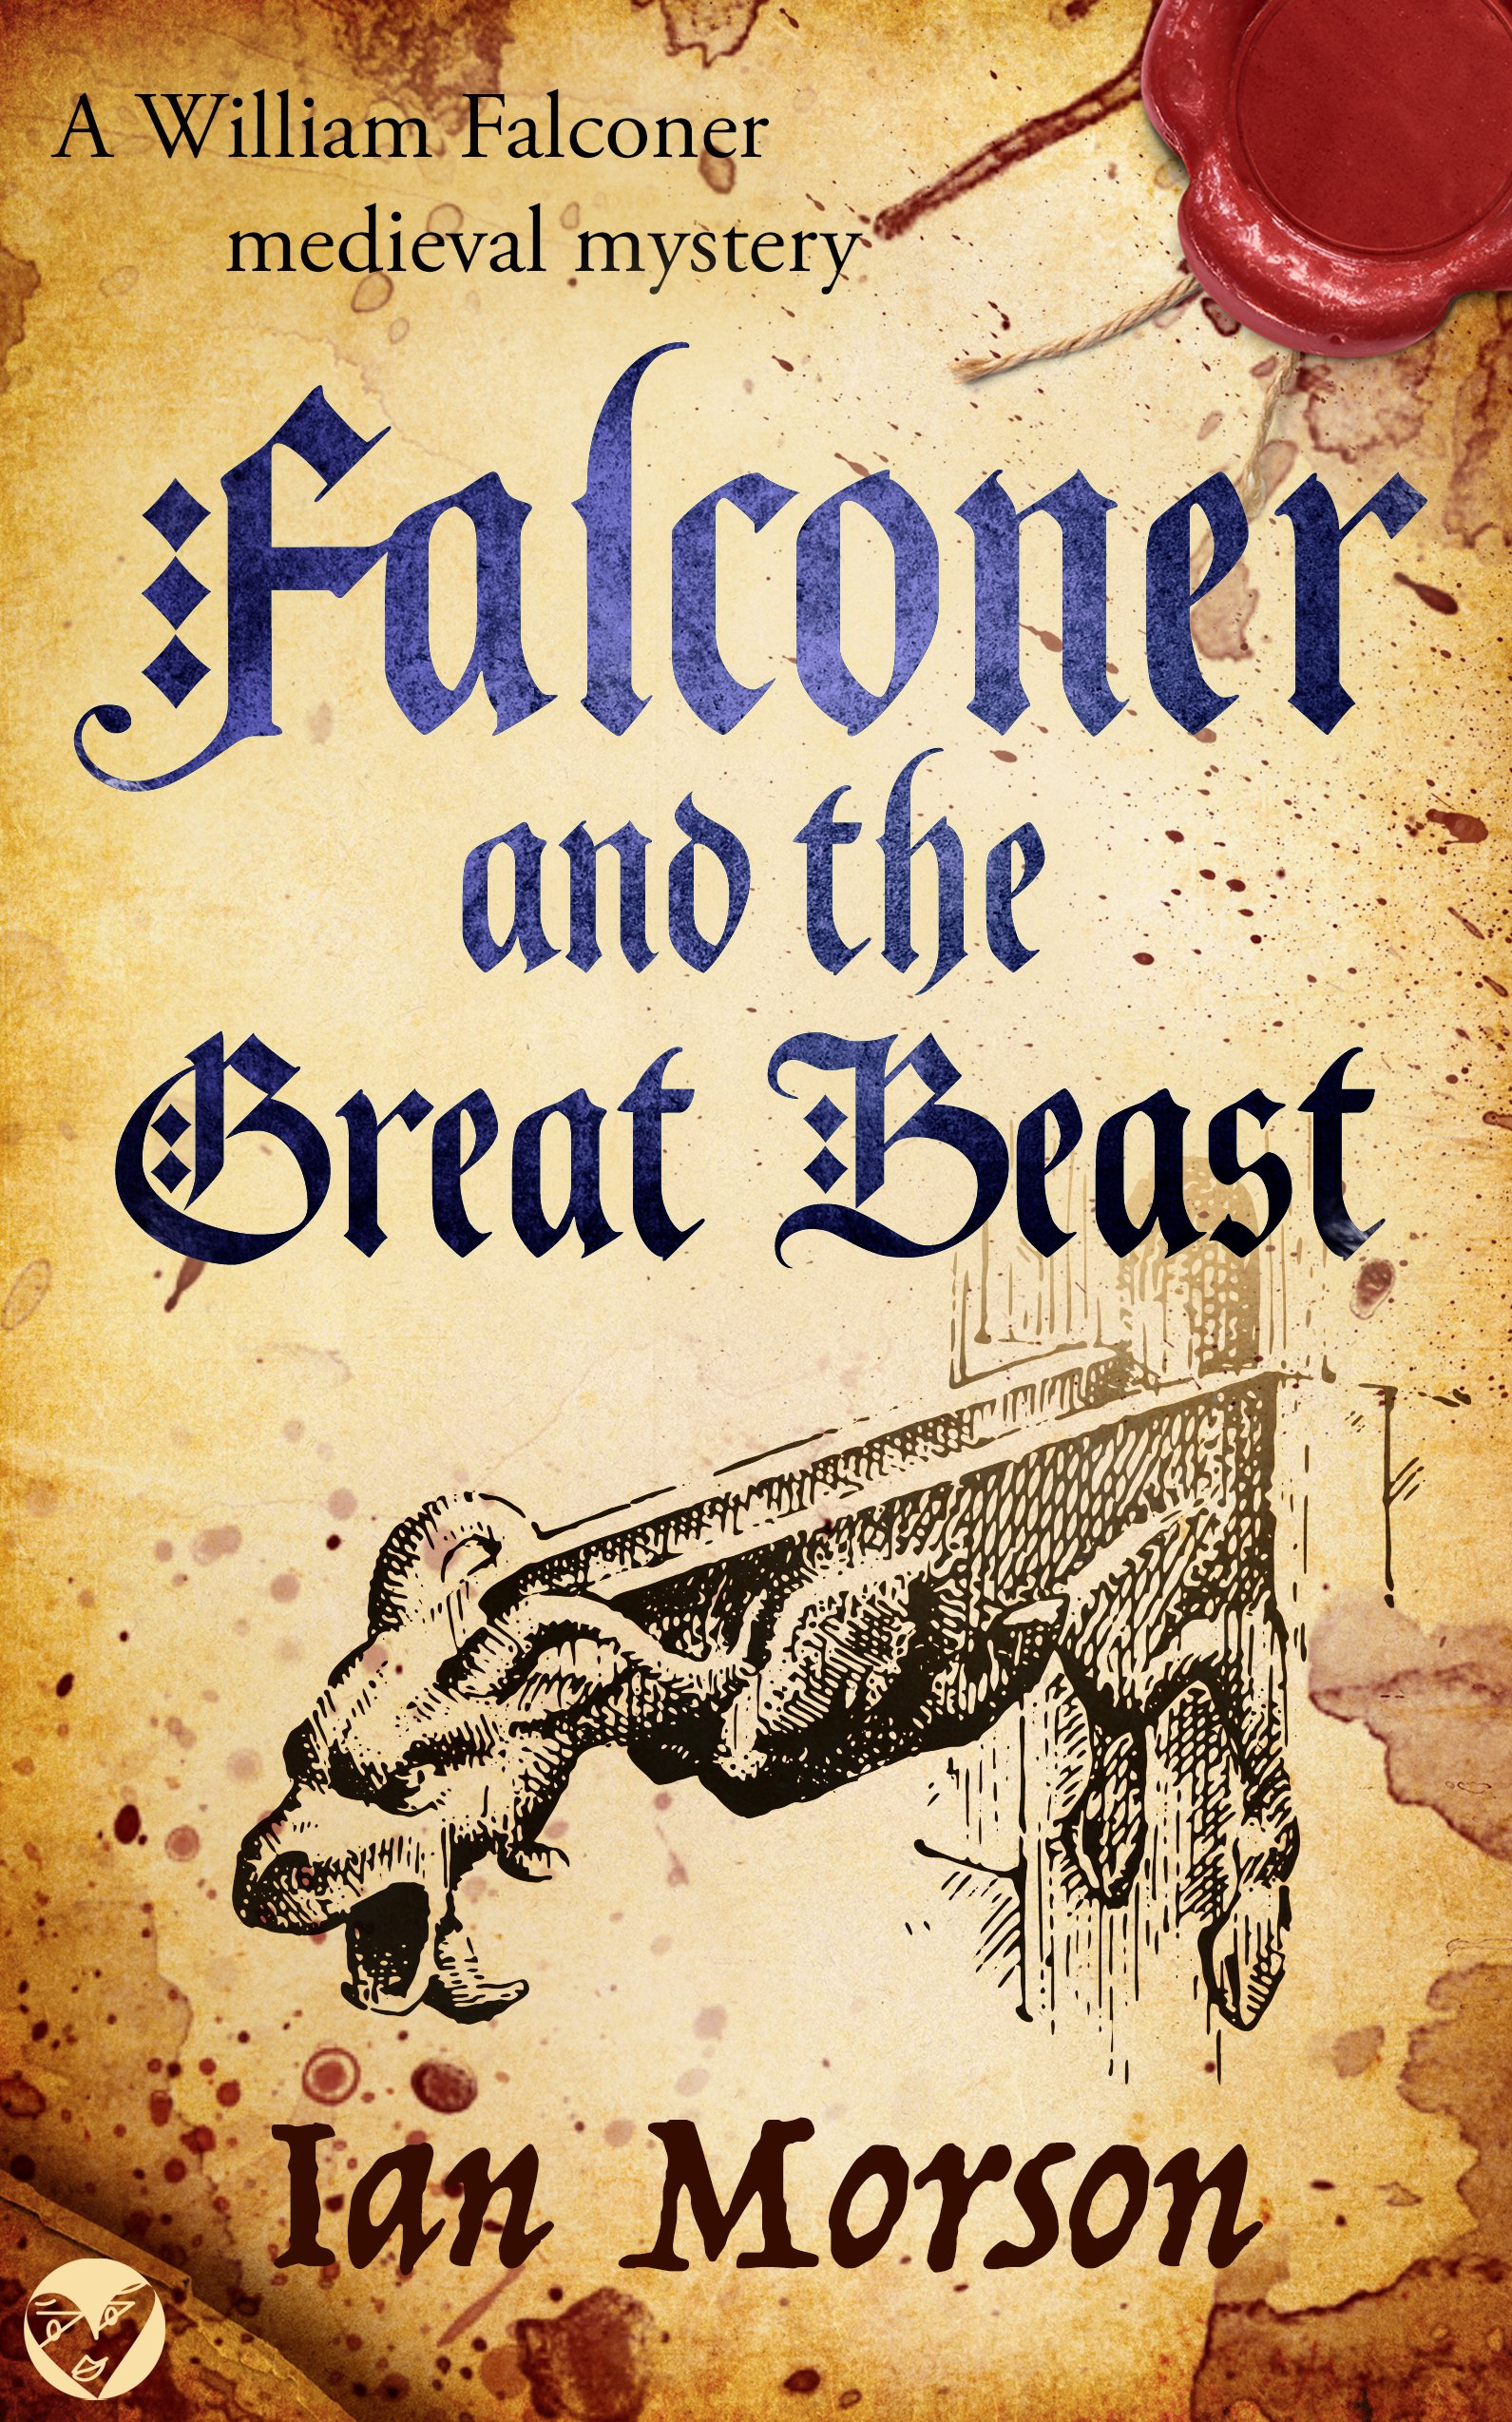 FALCONER AND THE GREAT BEAST Cover publish.jpg